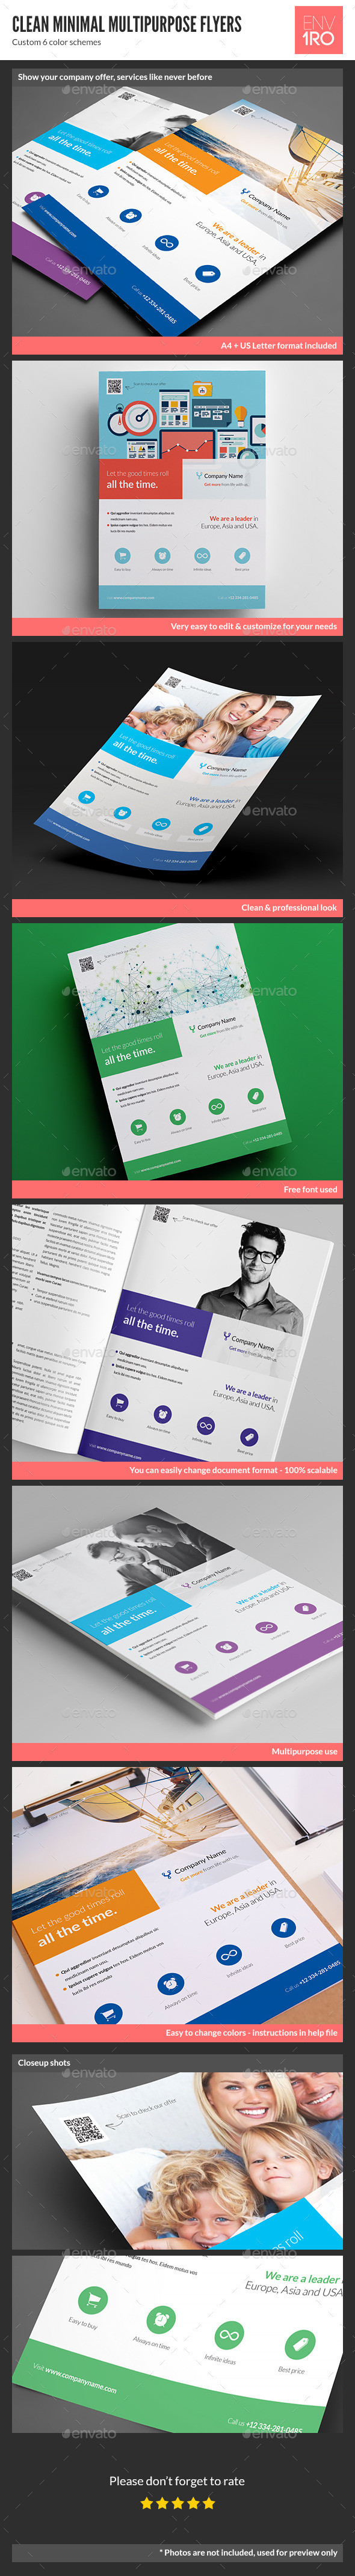 Clean minimal icons multipurpose corporate business indesign flyers